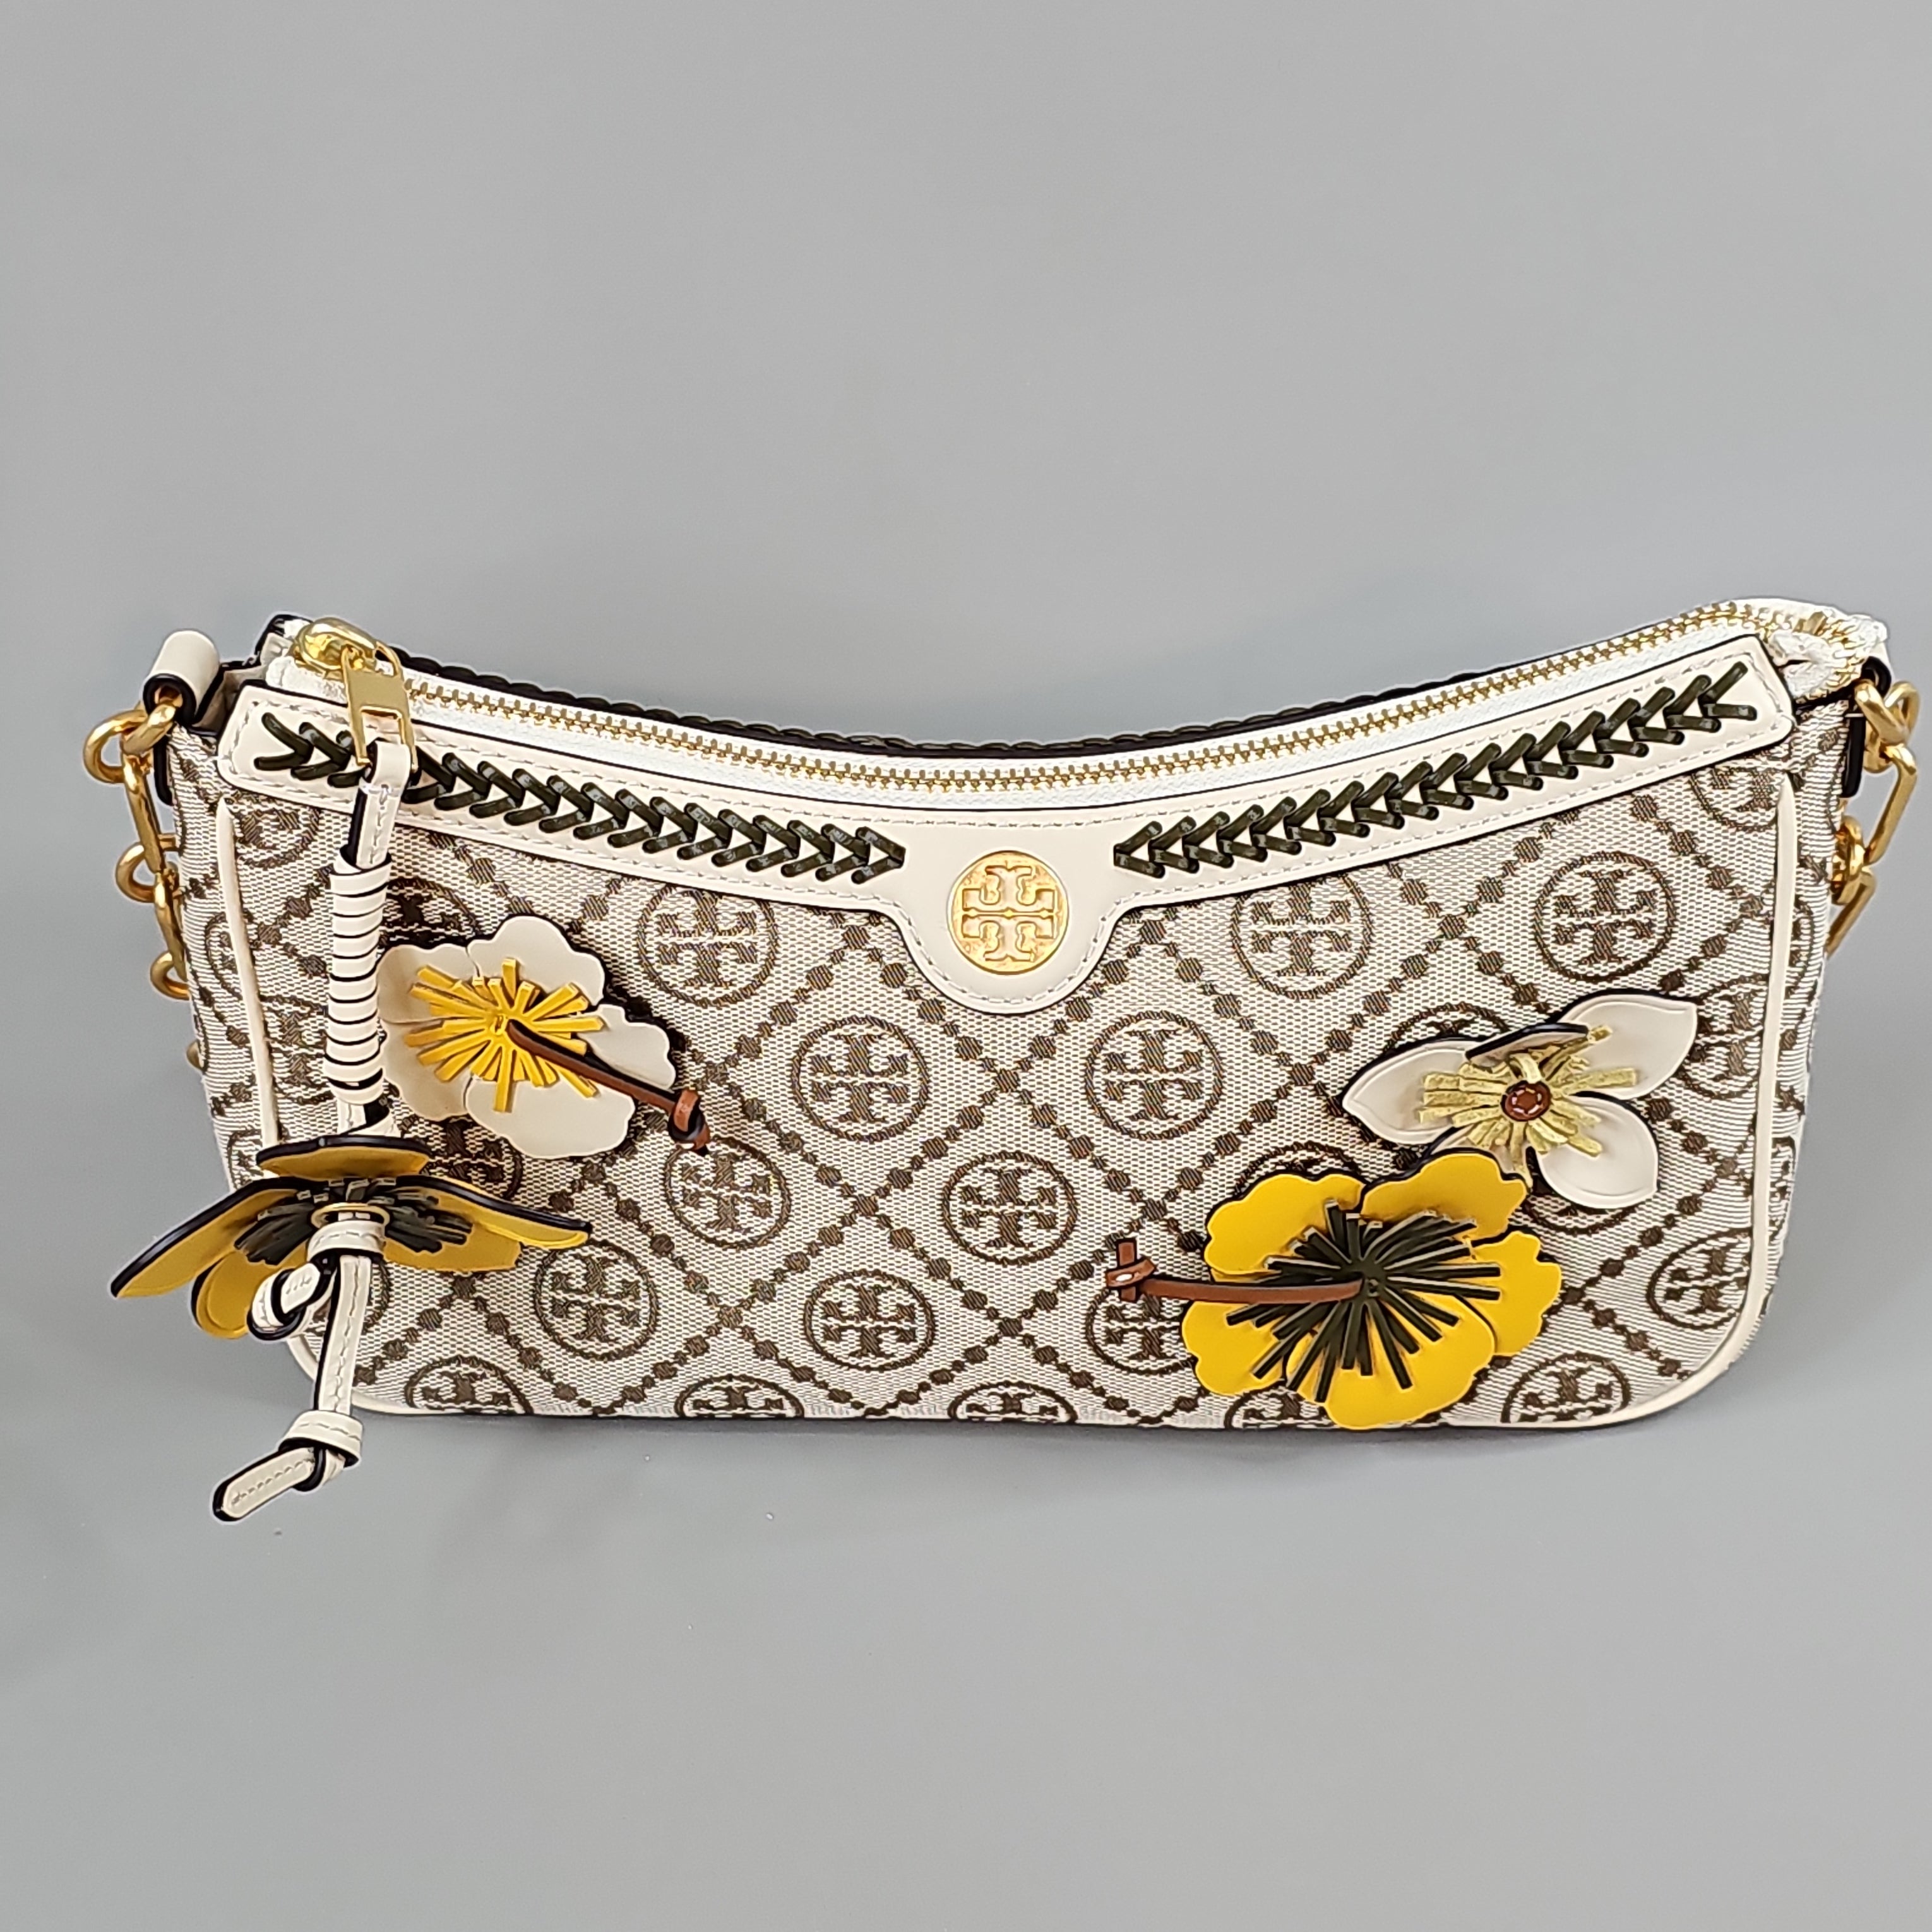 Tory Burch, Bags, Nwt Tory Burch Authentic Melody Floral Bag